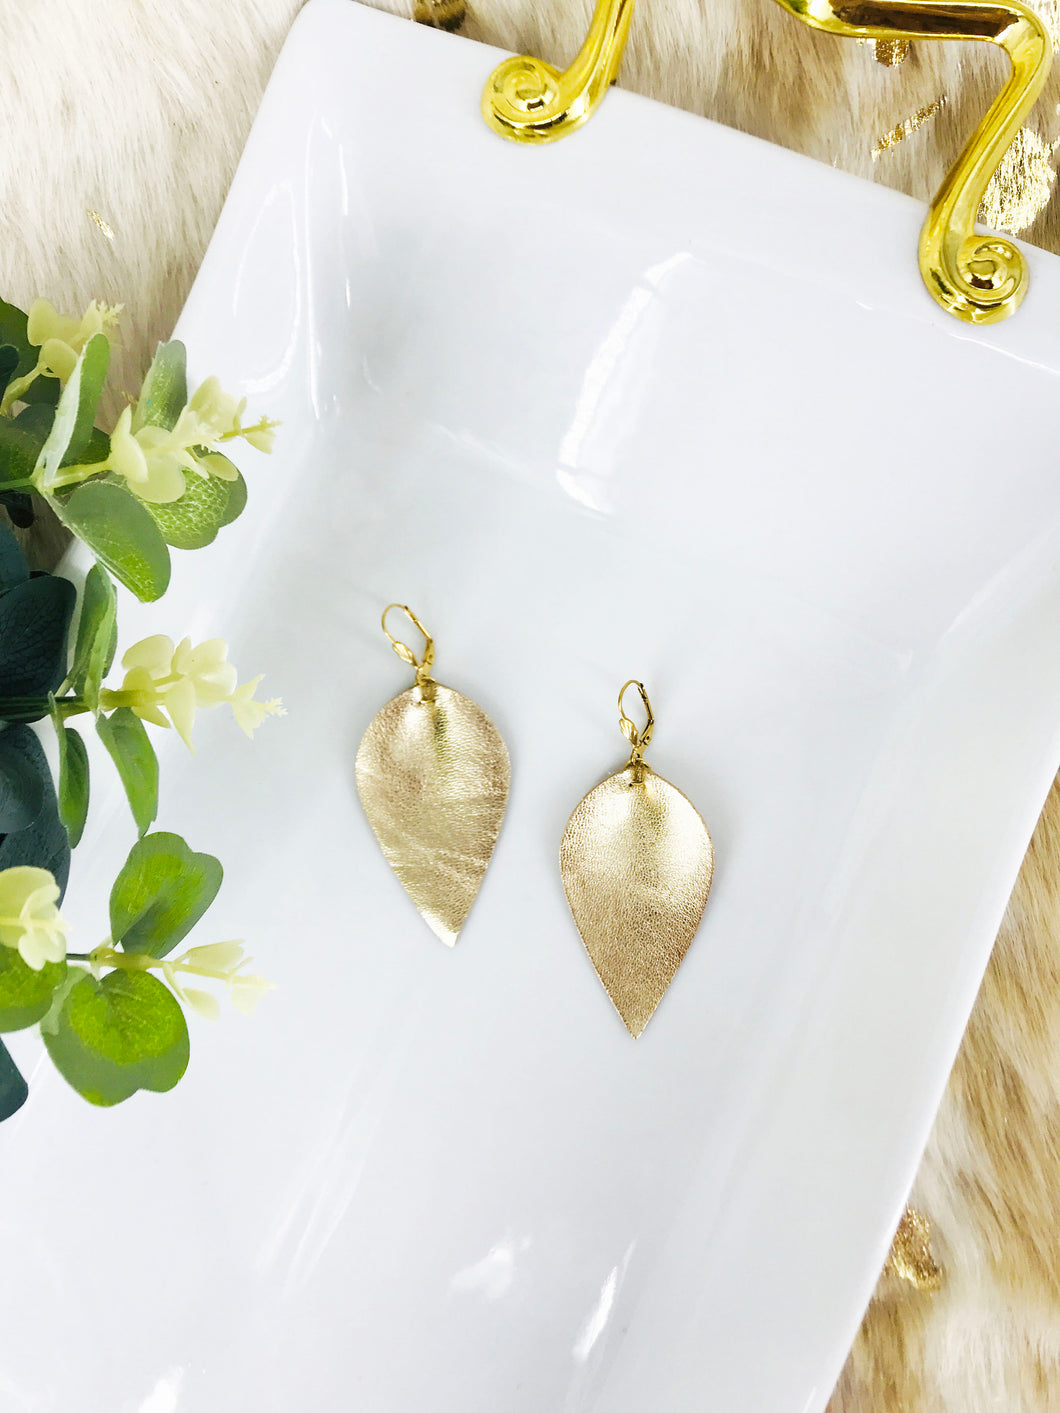 Metallic Gold Pinched Leaf Leather Earrings - E19-3664